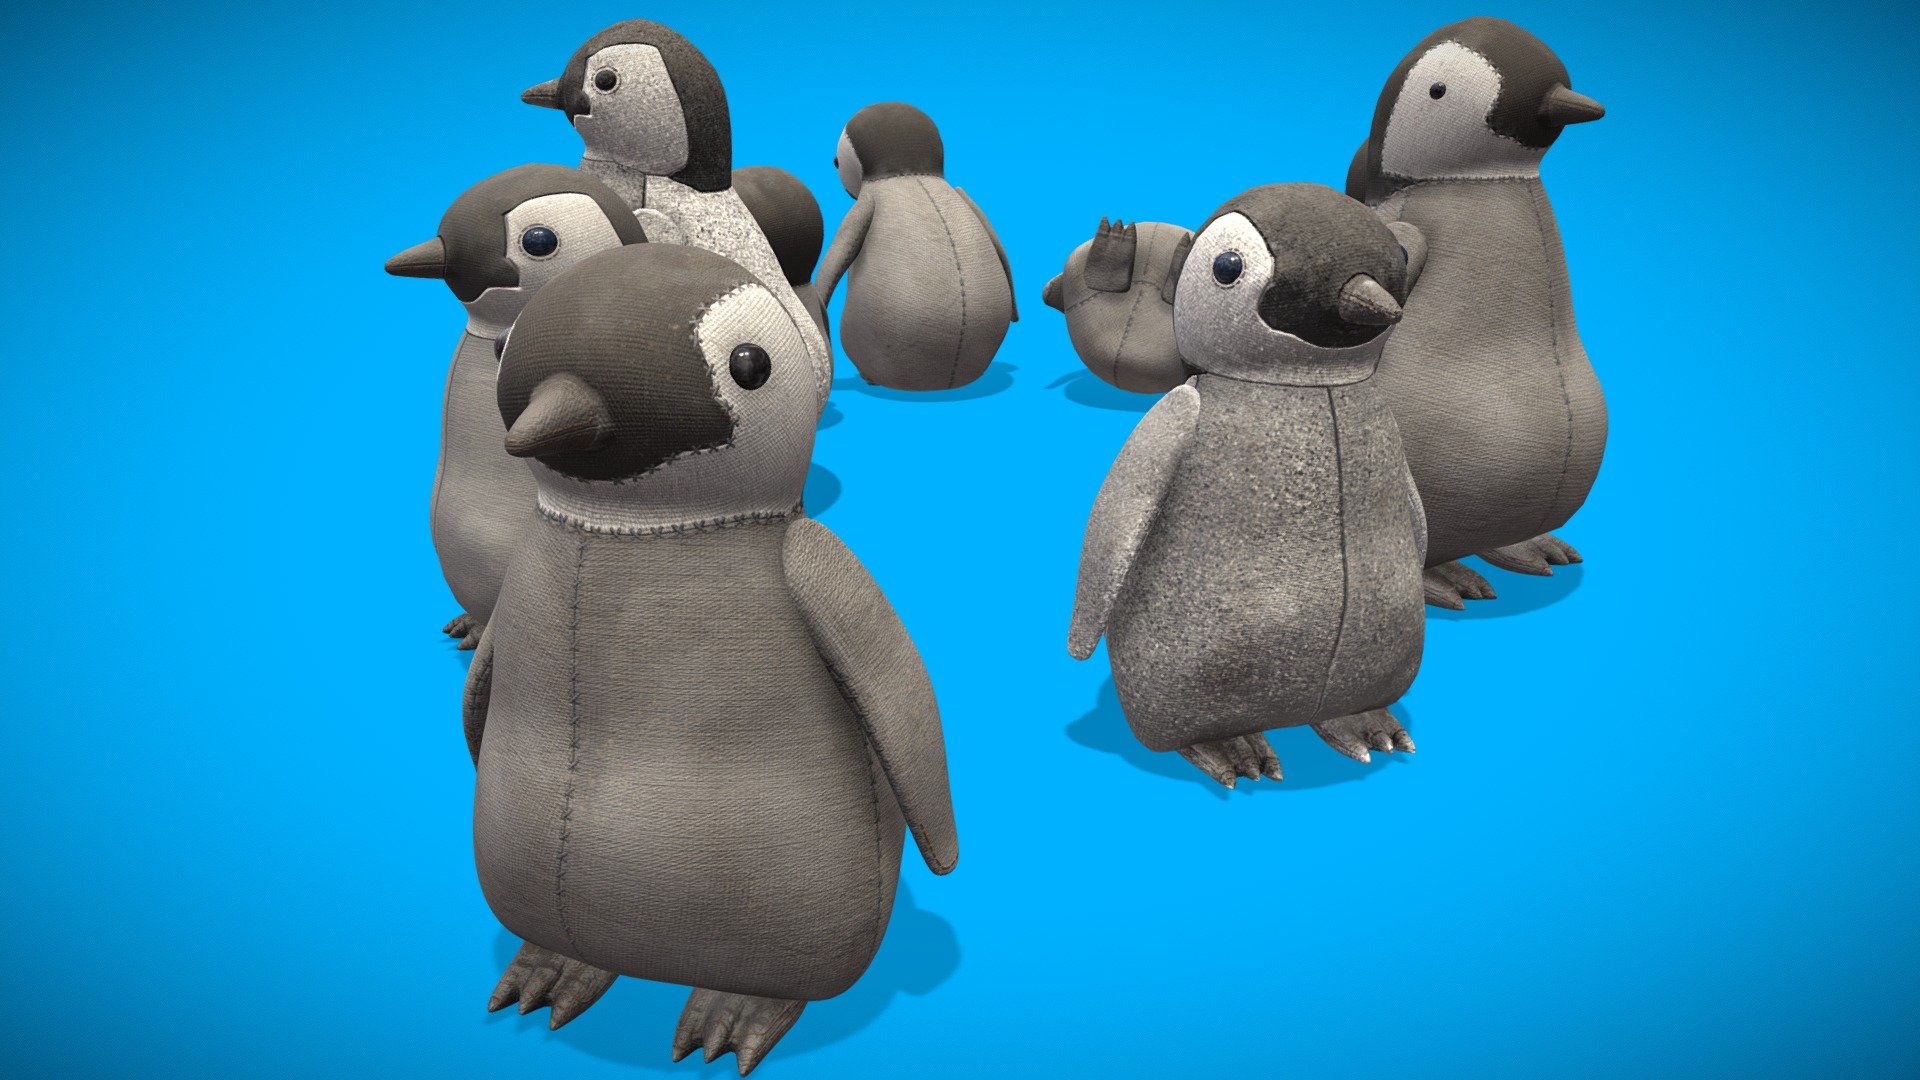 Child's Stuffed penguin toy, in several variations both in models and textures - From new to well-loved and worn. One model is subdivided for extra smoothness, the rest are in their native state. Specficially a baby Emperor-Penguin 3d model